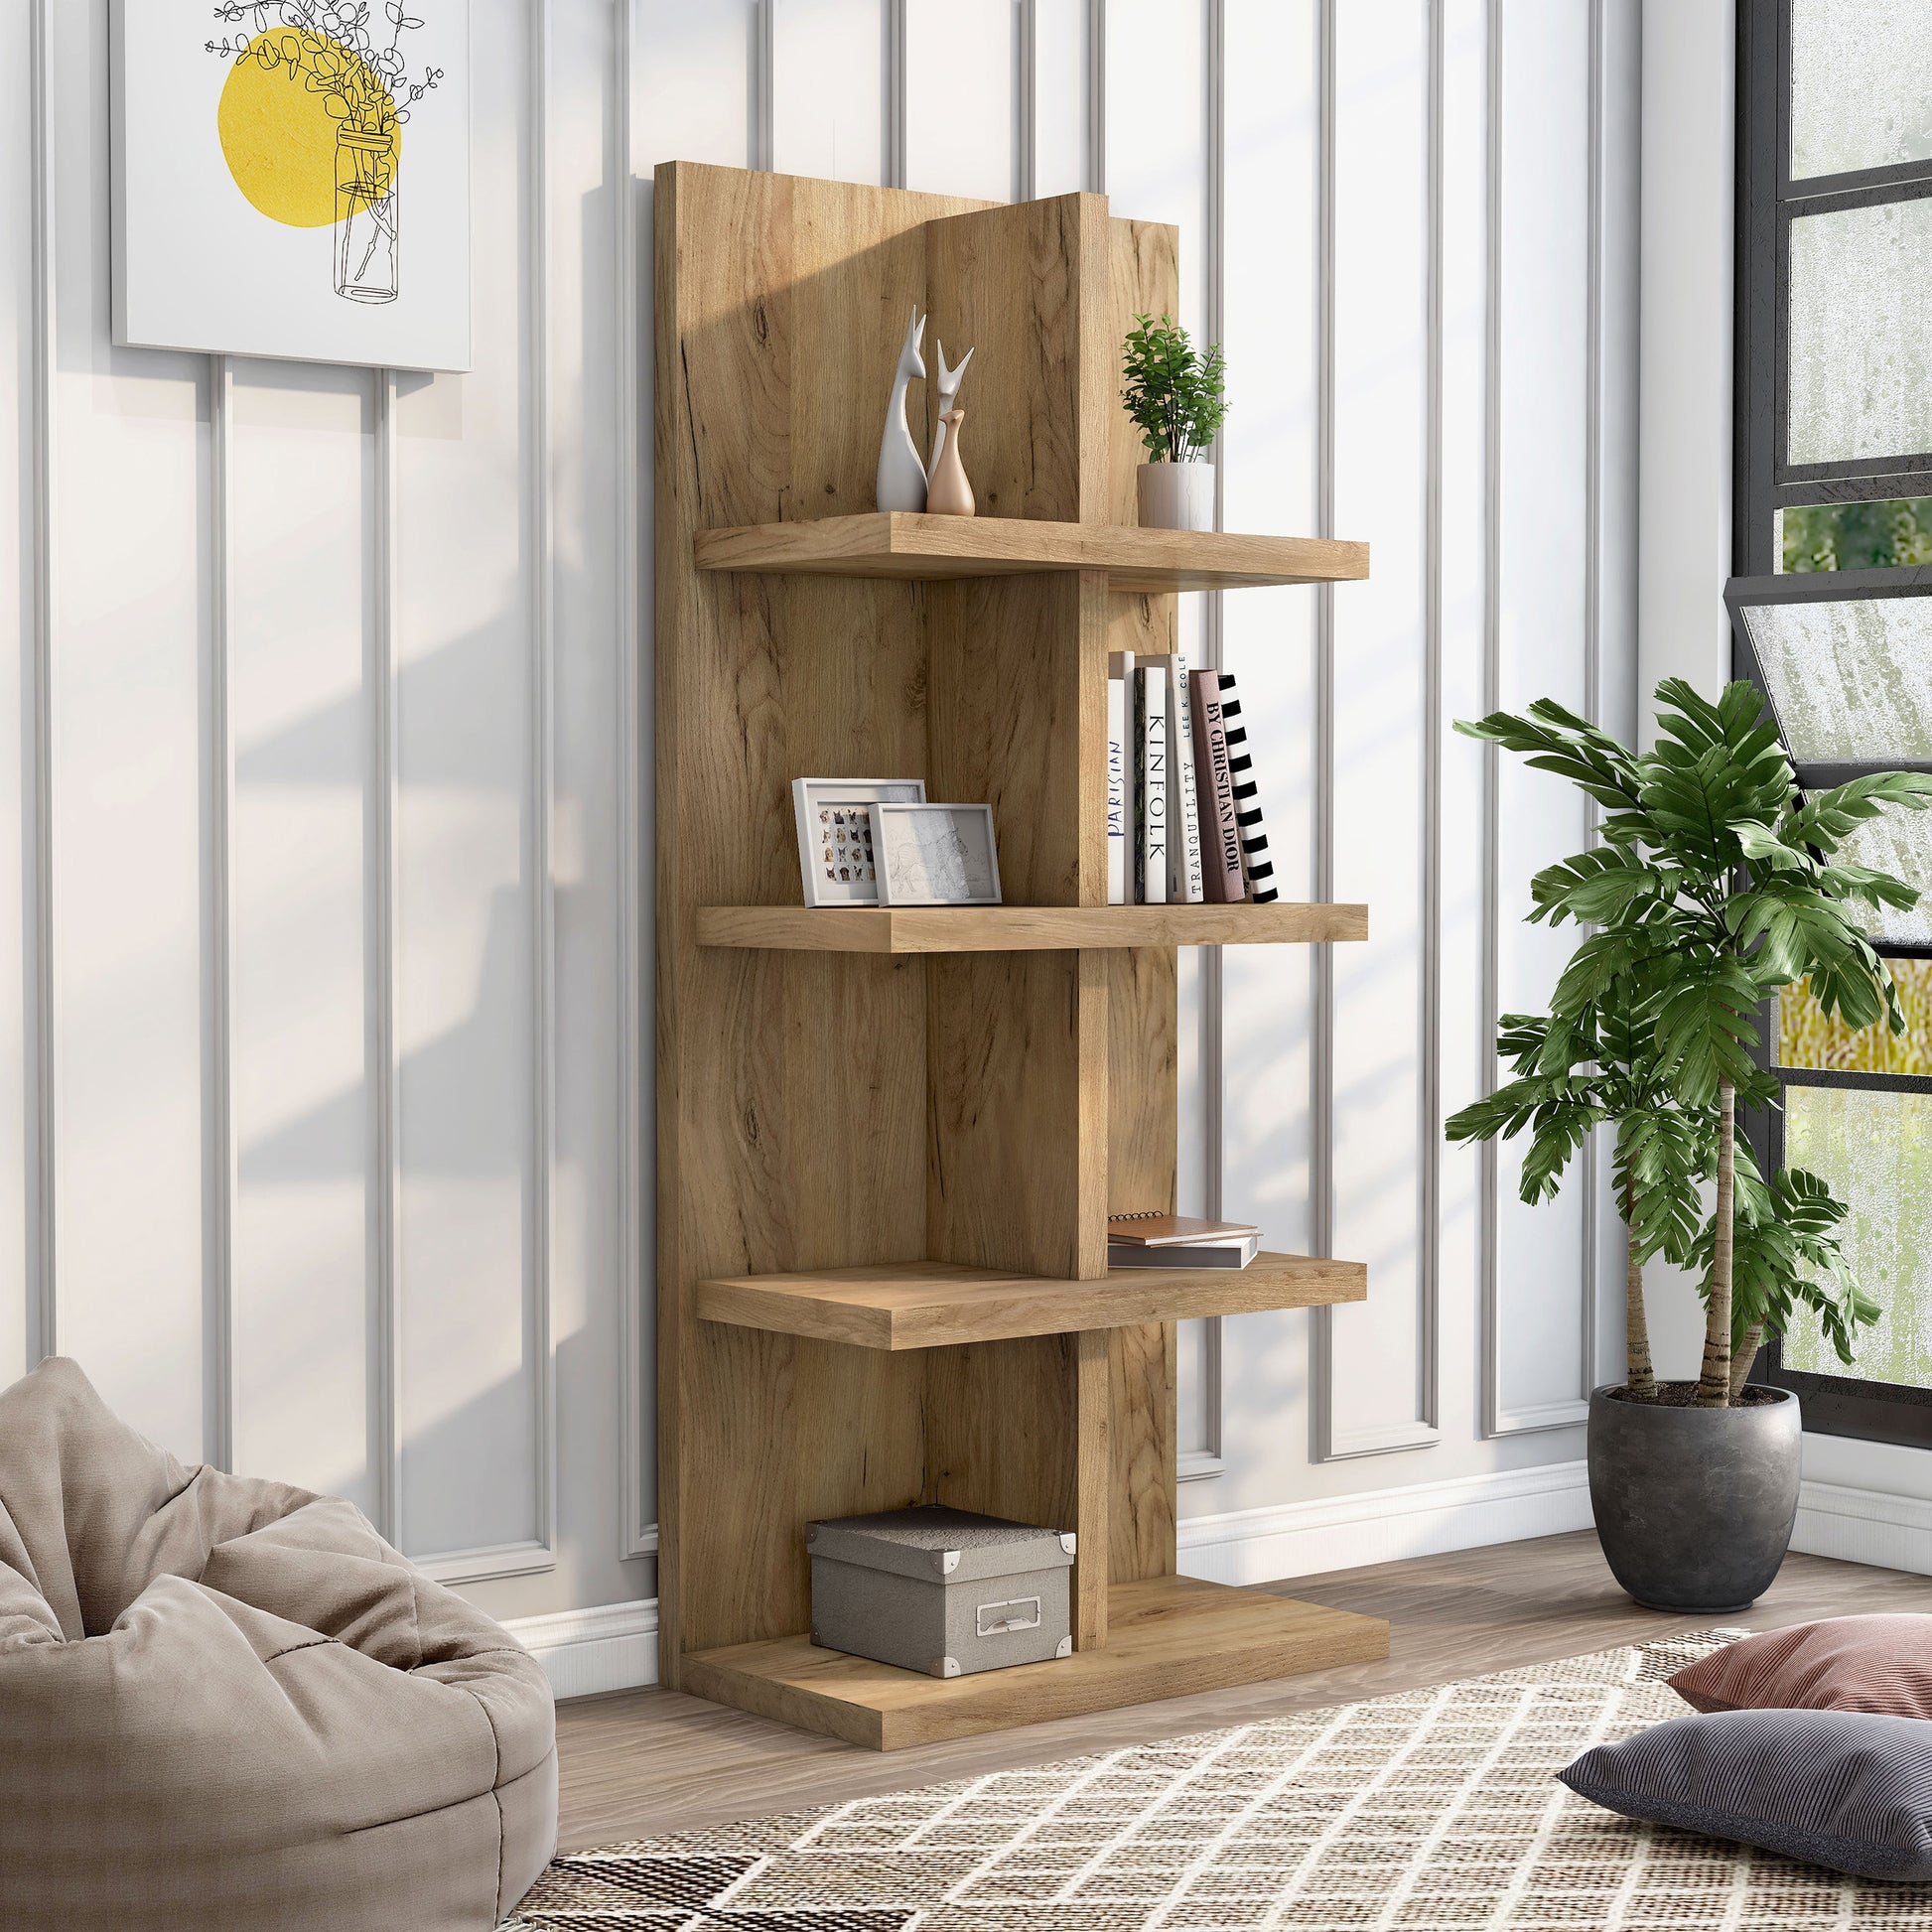 Right angled contemporary light oak eight-shelf bookcase in a living area with accessories